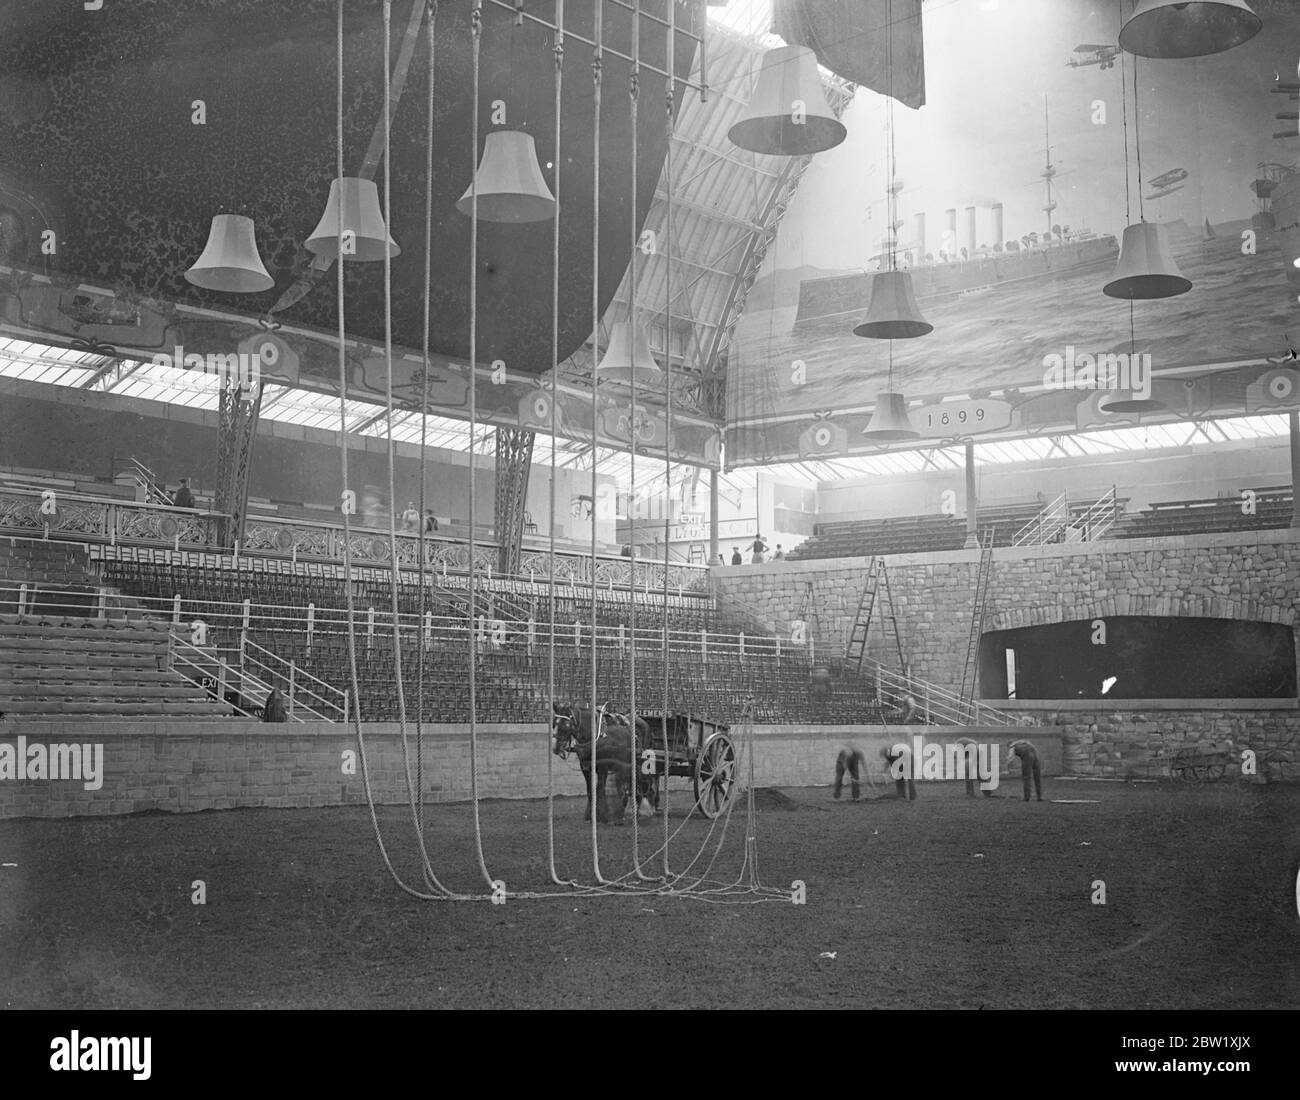 Preparing Olympia for the Royal tournament. Men preparing the surface of the arena at Olympia, London, in readiness for the Royal tournament opening Thursday. 23 May 1937 Stock Photo